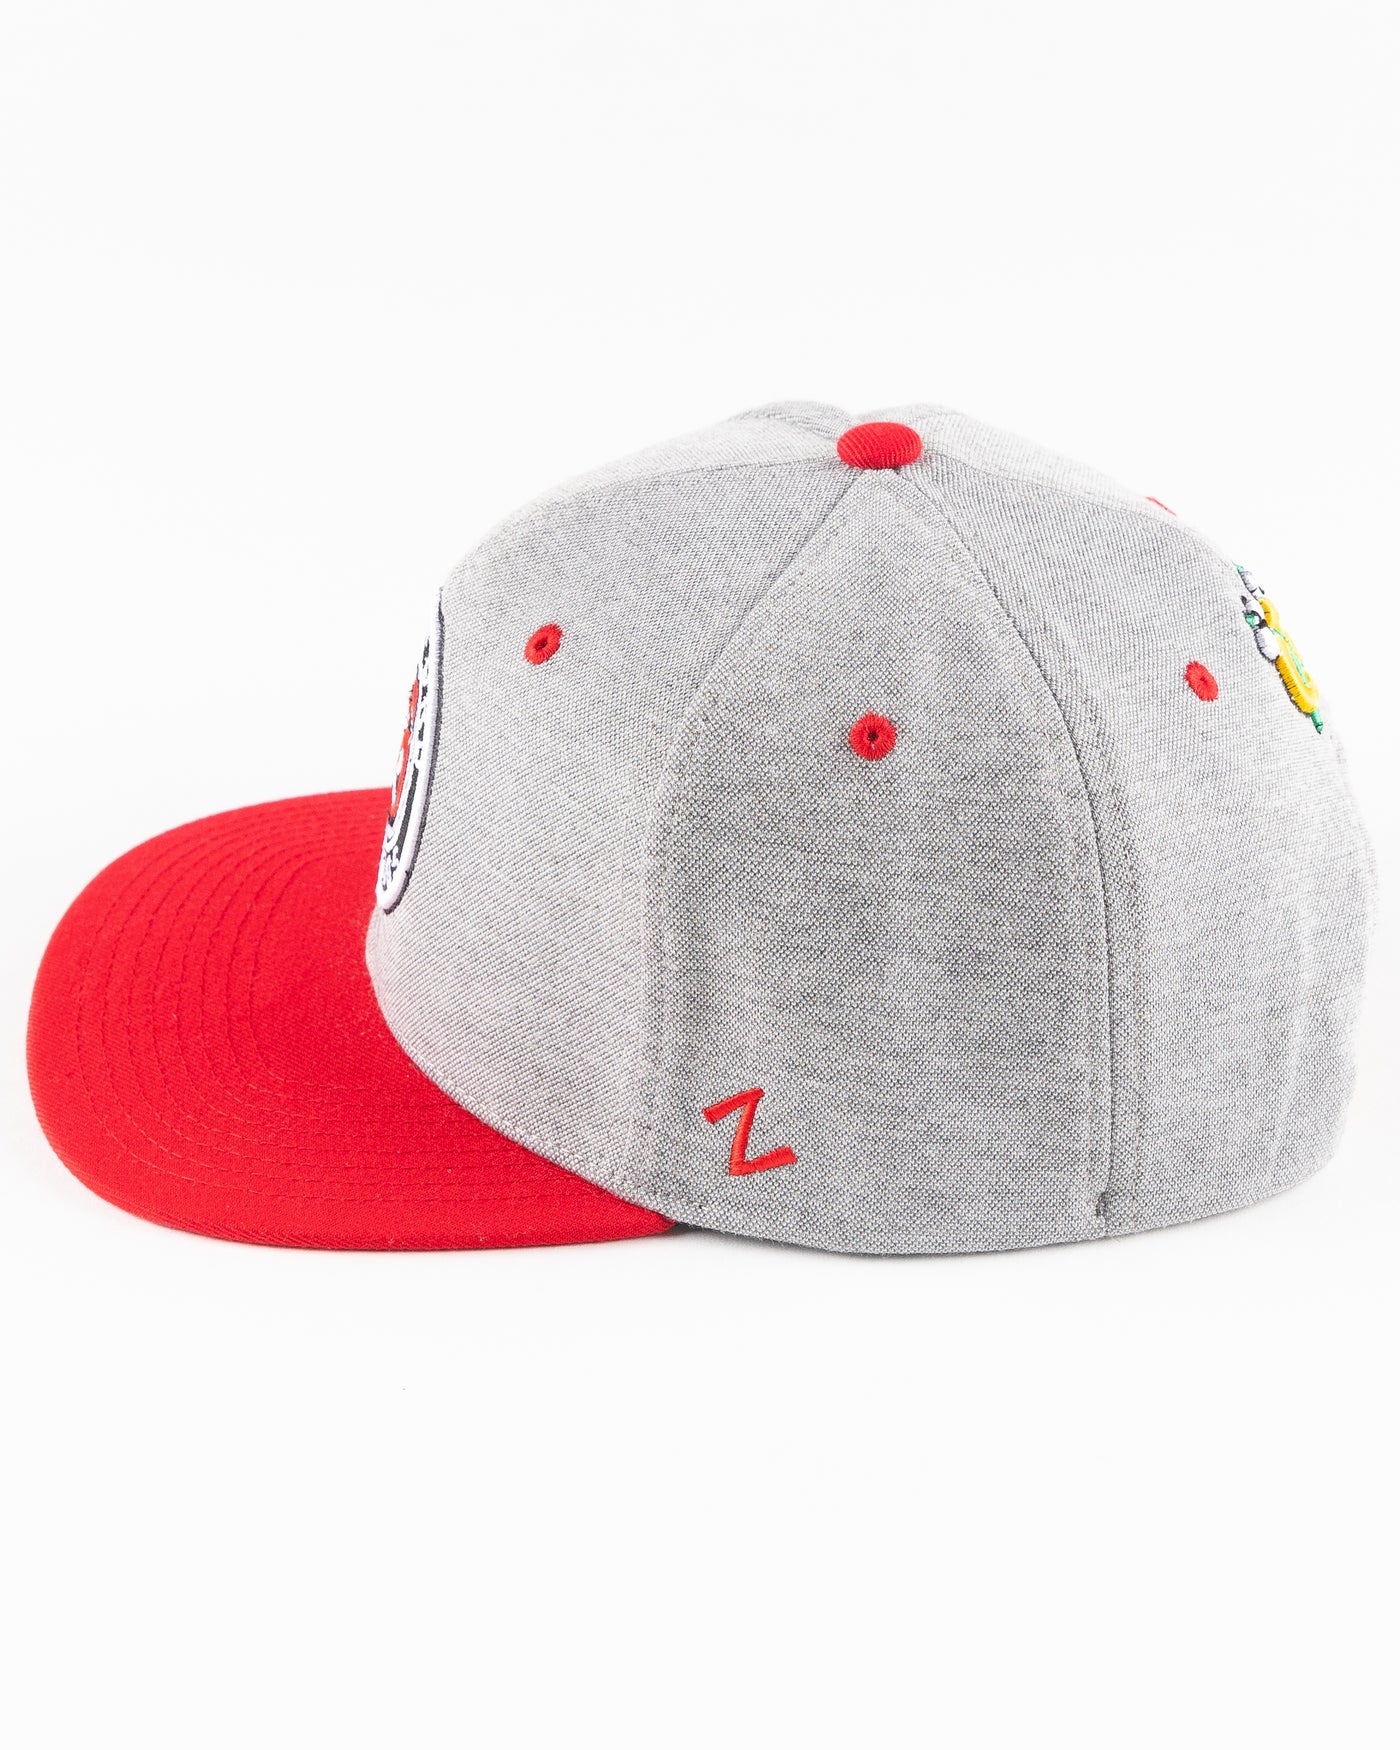 grey Rockford IceHogs snapback with red brim and embroidered IceHogs patch - left side lay flat